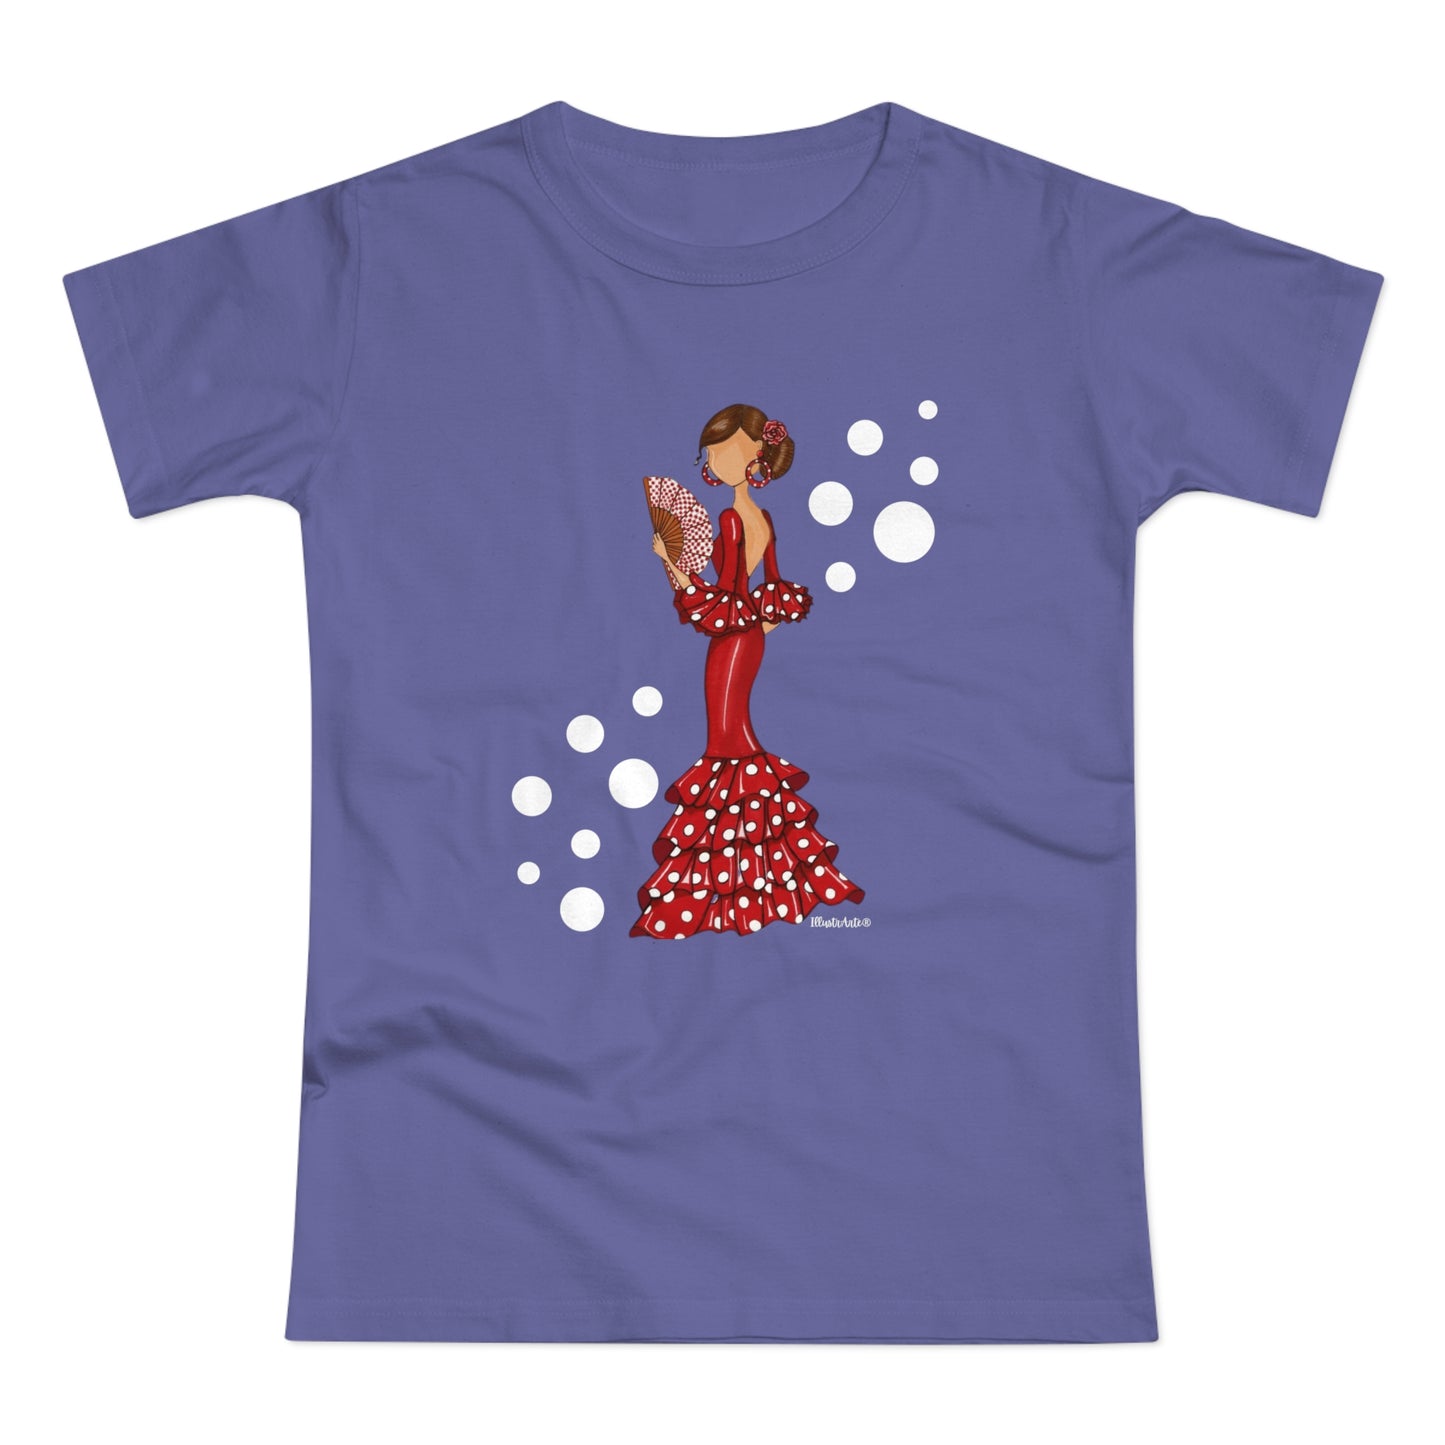 a women's t - shirt with a woman in a polka dot dress holding